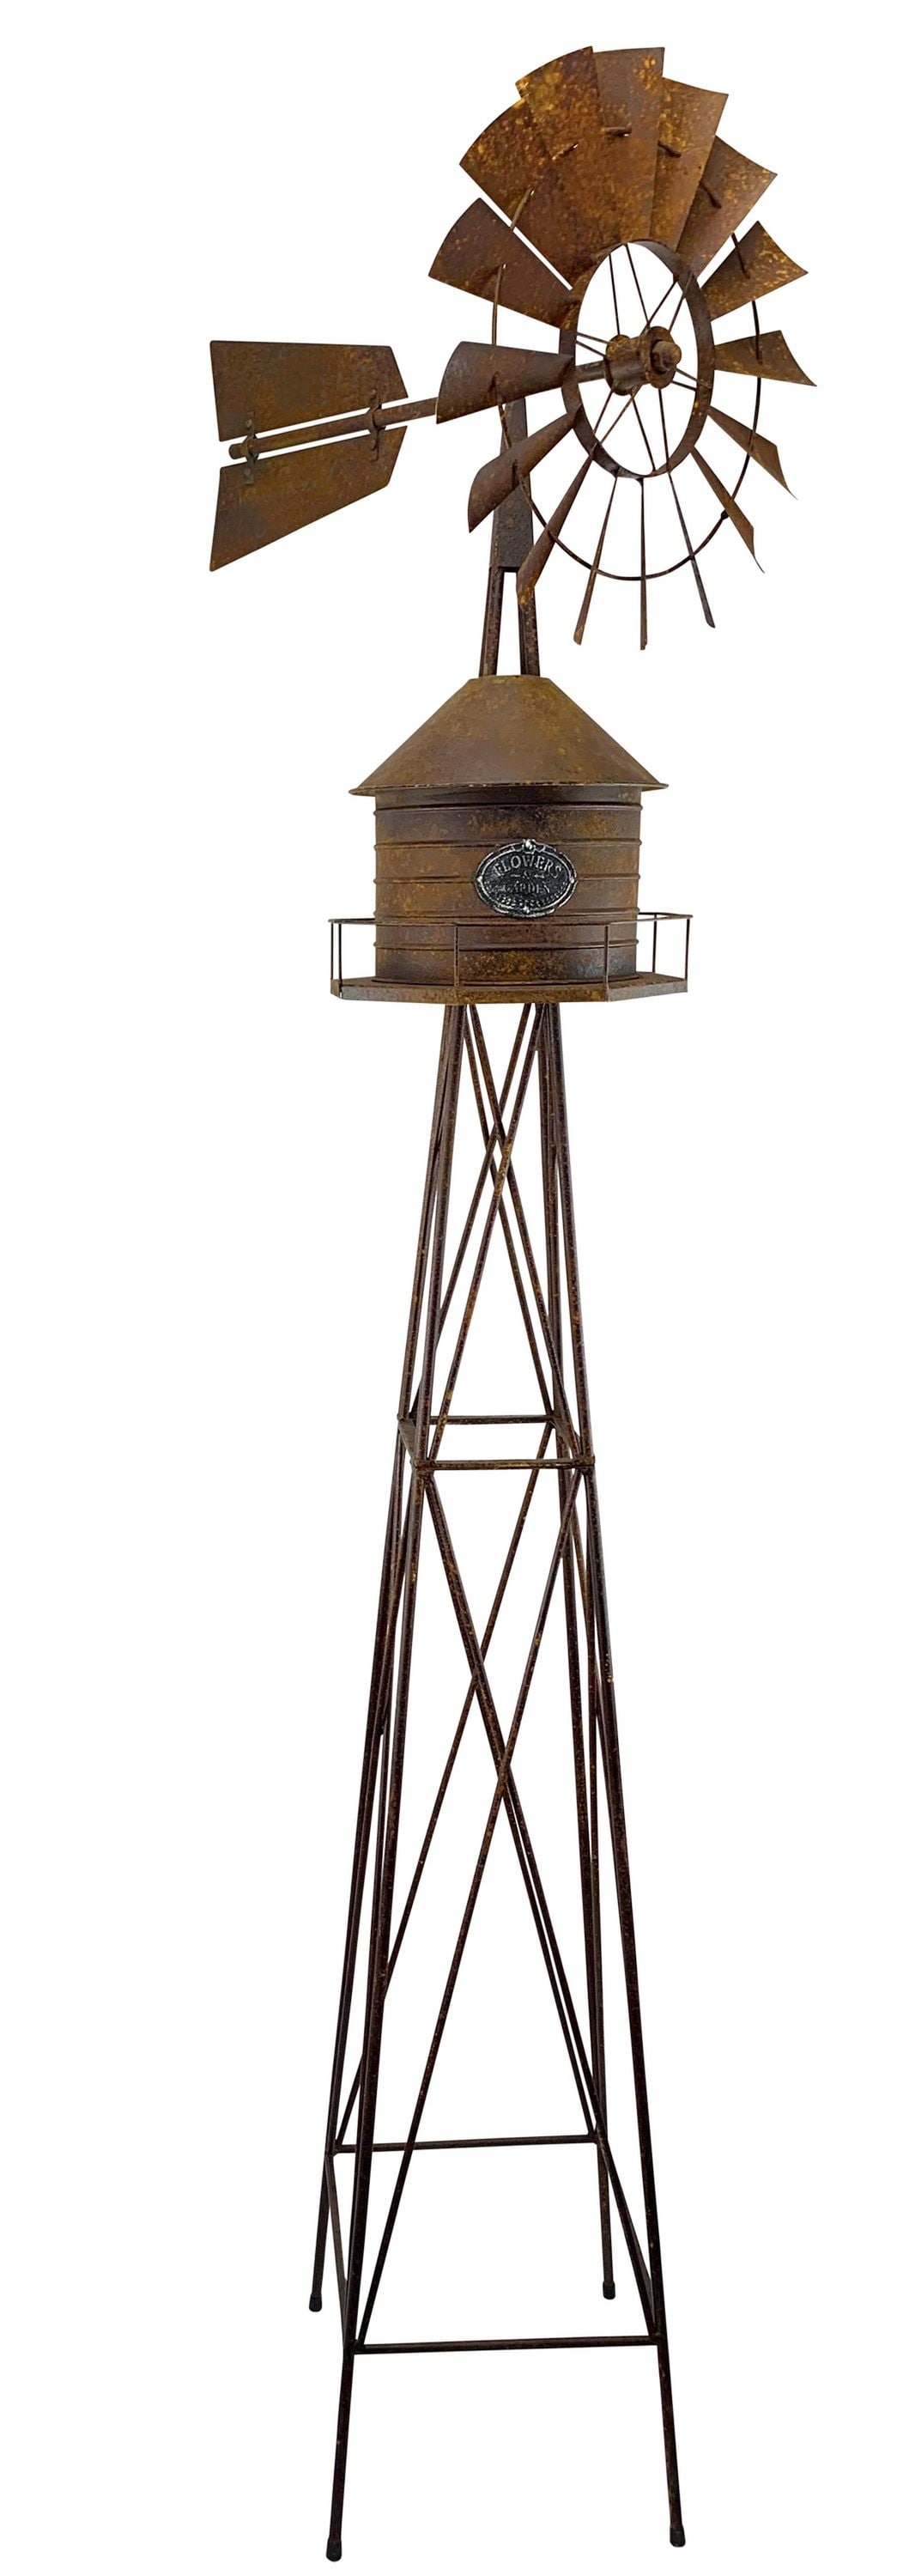 Rcs Gifts Decorative Windmill 74 25 In